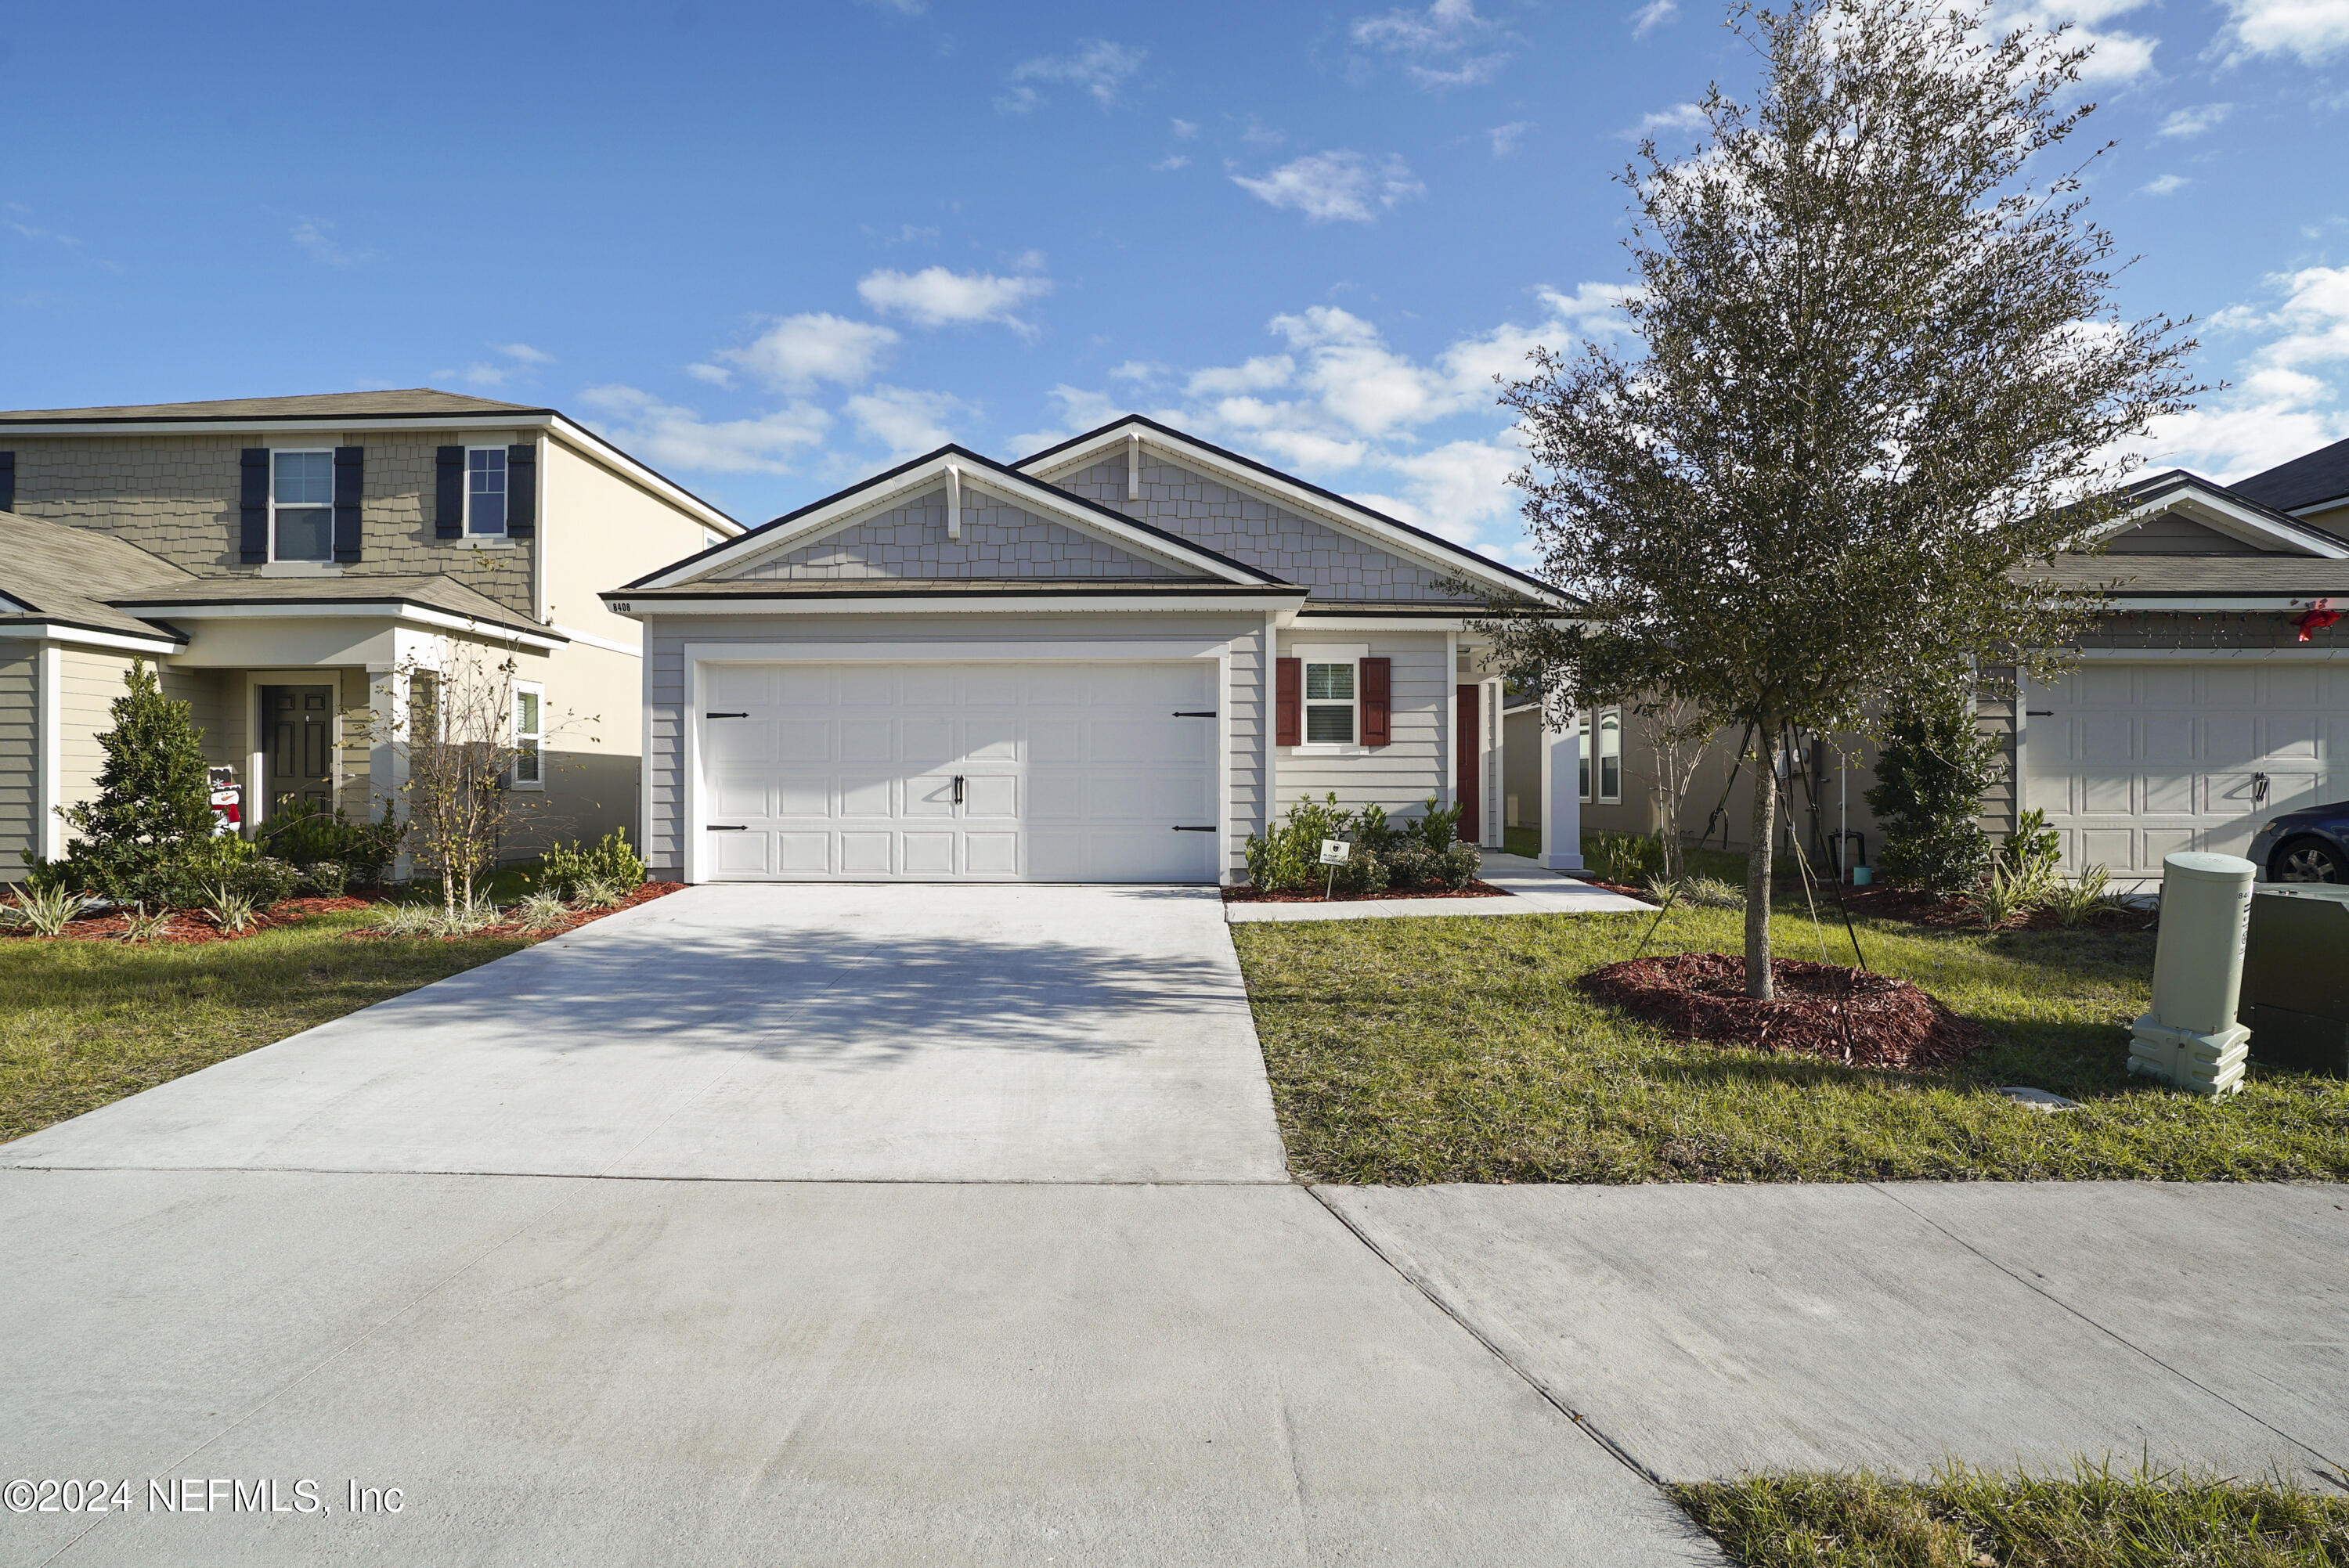 Jacksonville, FL home for sale located at 8408 Meadow Walk Lane, Jacksonville, FL 32256